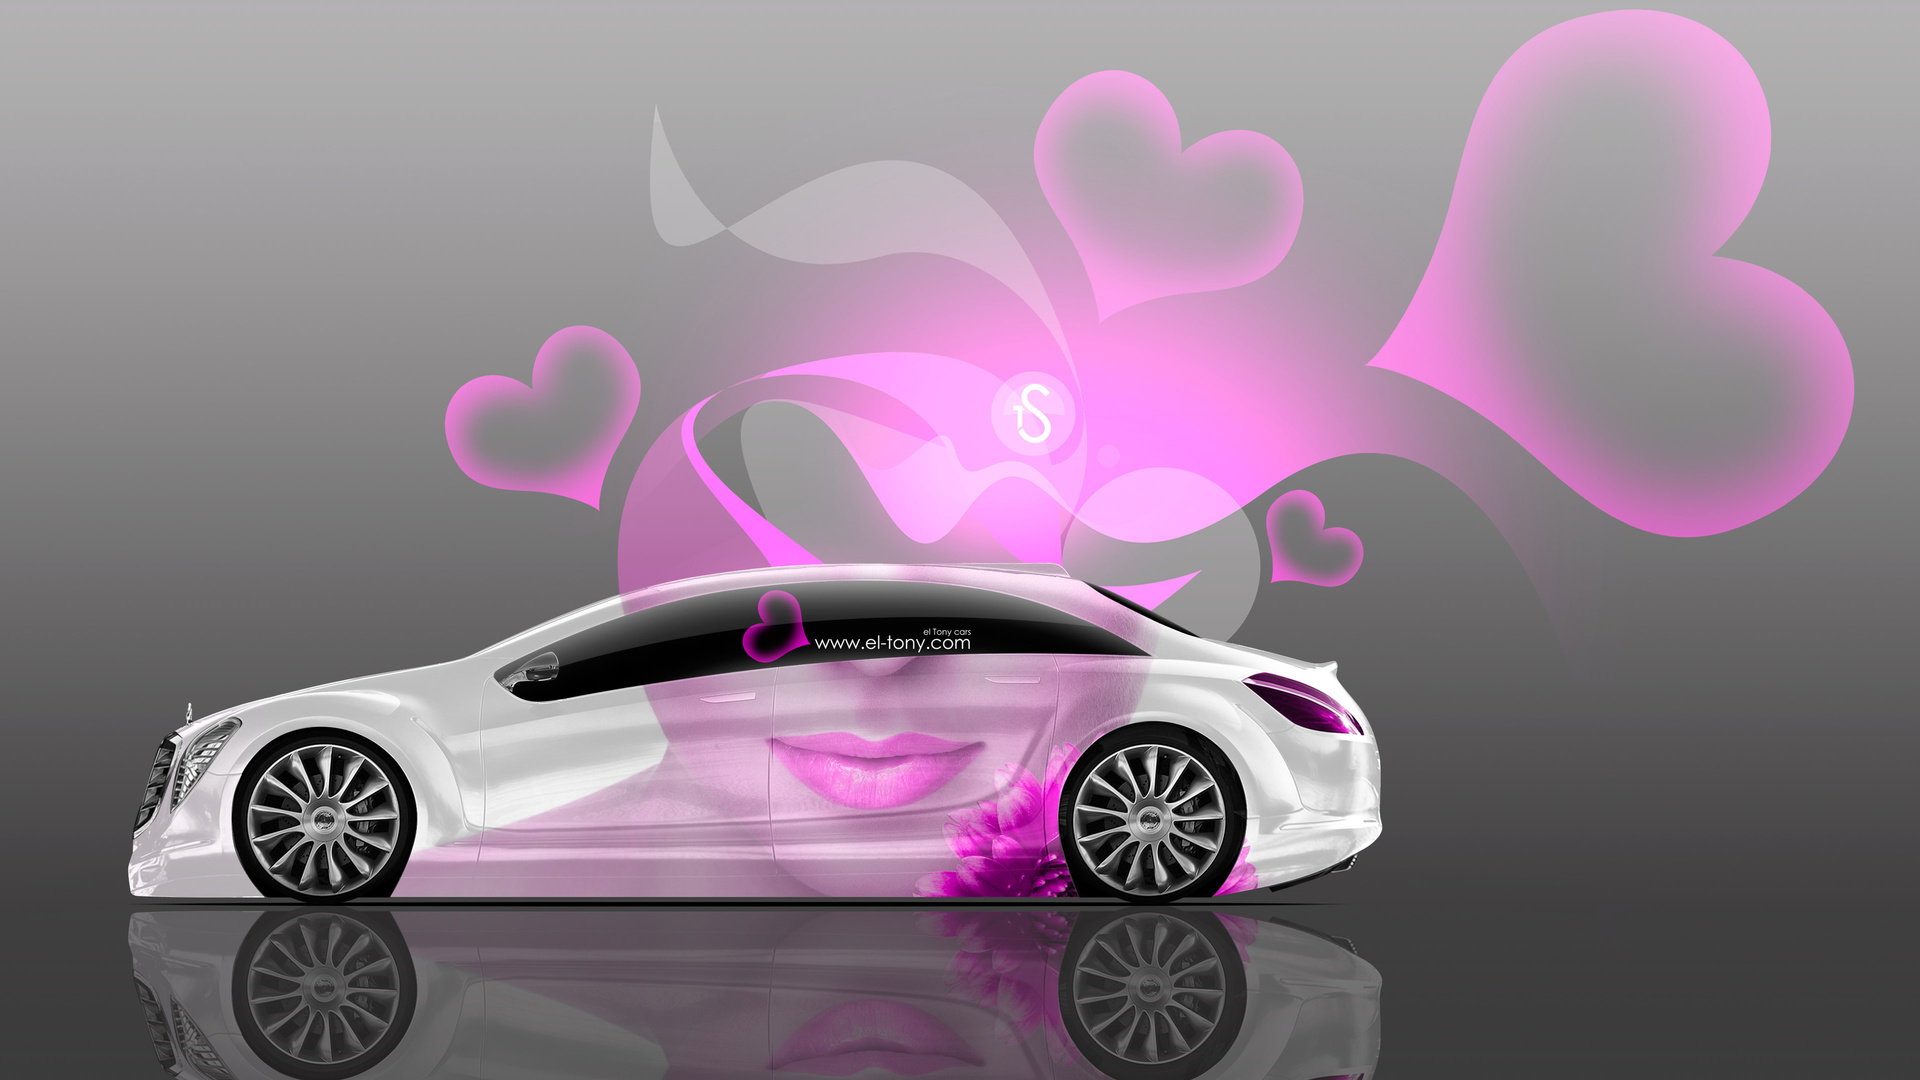 tony kokhan, mercedes-benz, f700, side, glamour, girl, aerography, pink, neon, effects, lips, 4k, wallpapers, el tony cars, heart, design, art, style,  , , -, , 700,  , , , , , 